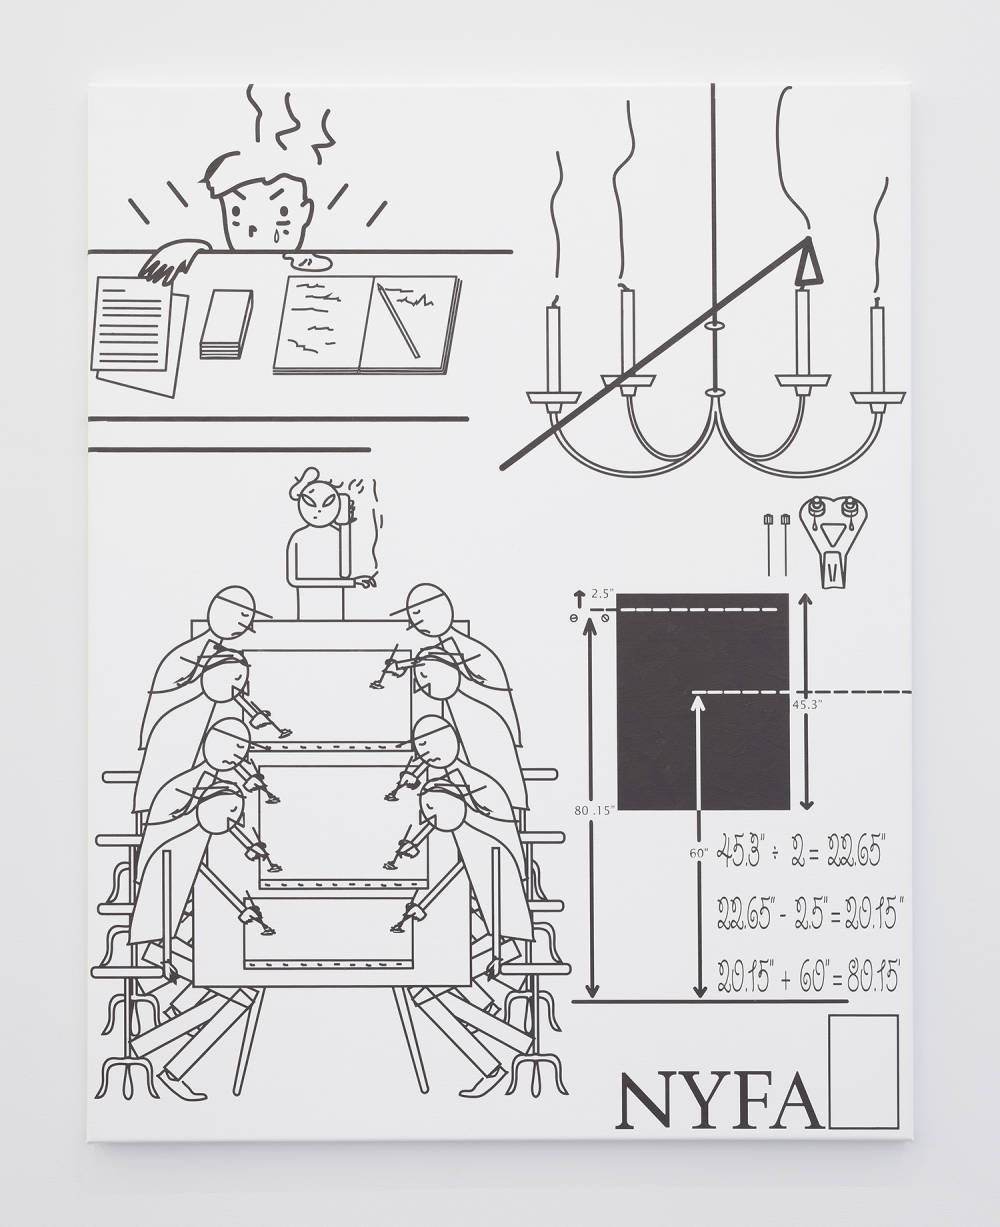 Image of an oil on canvas painting depicting an angry person at a desk, a candelabra, a studio with many assistants working on multiple paintings, the NYFA logo.